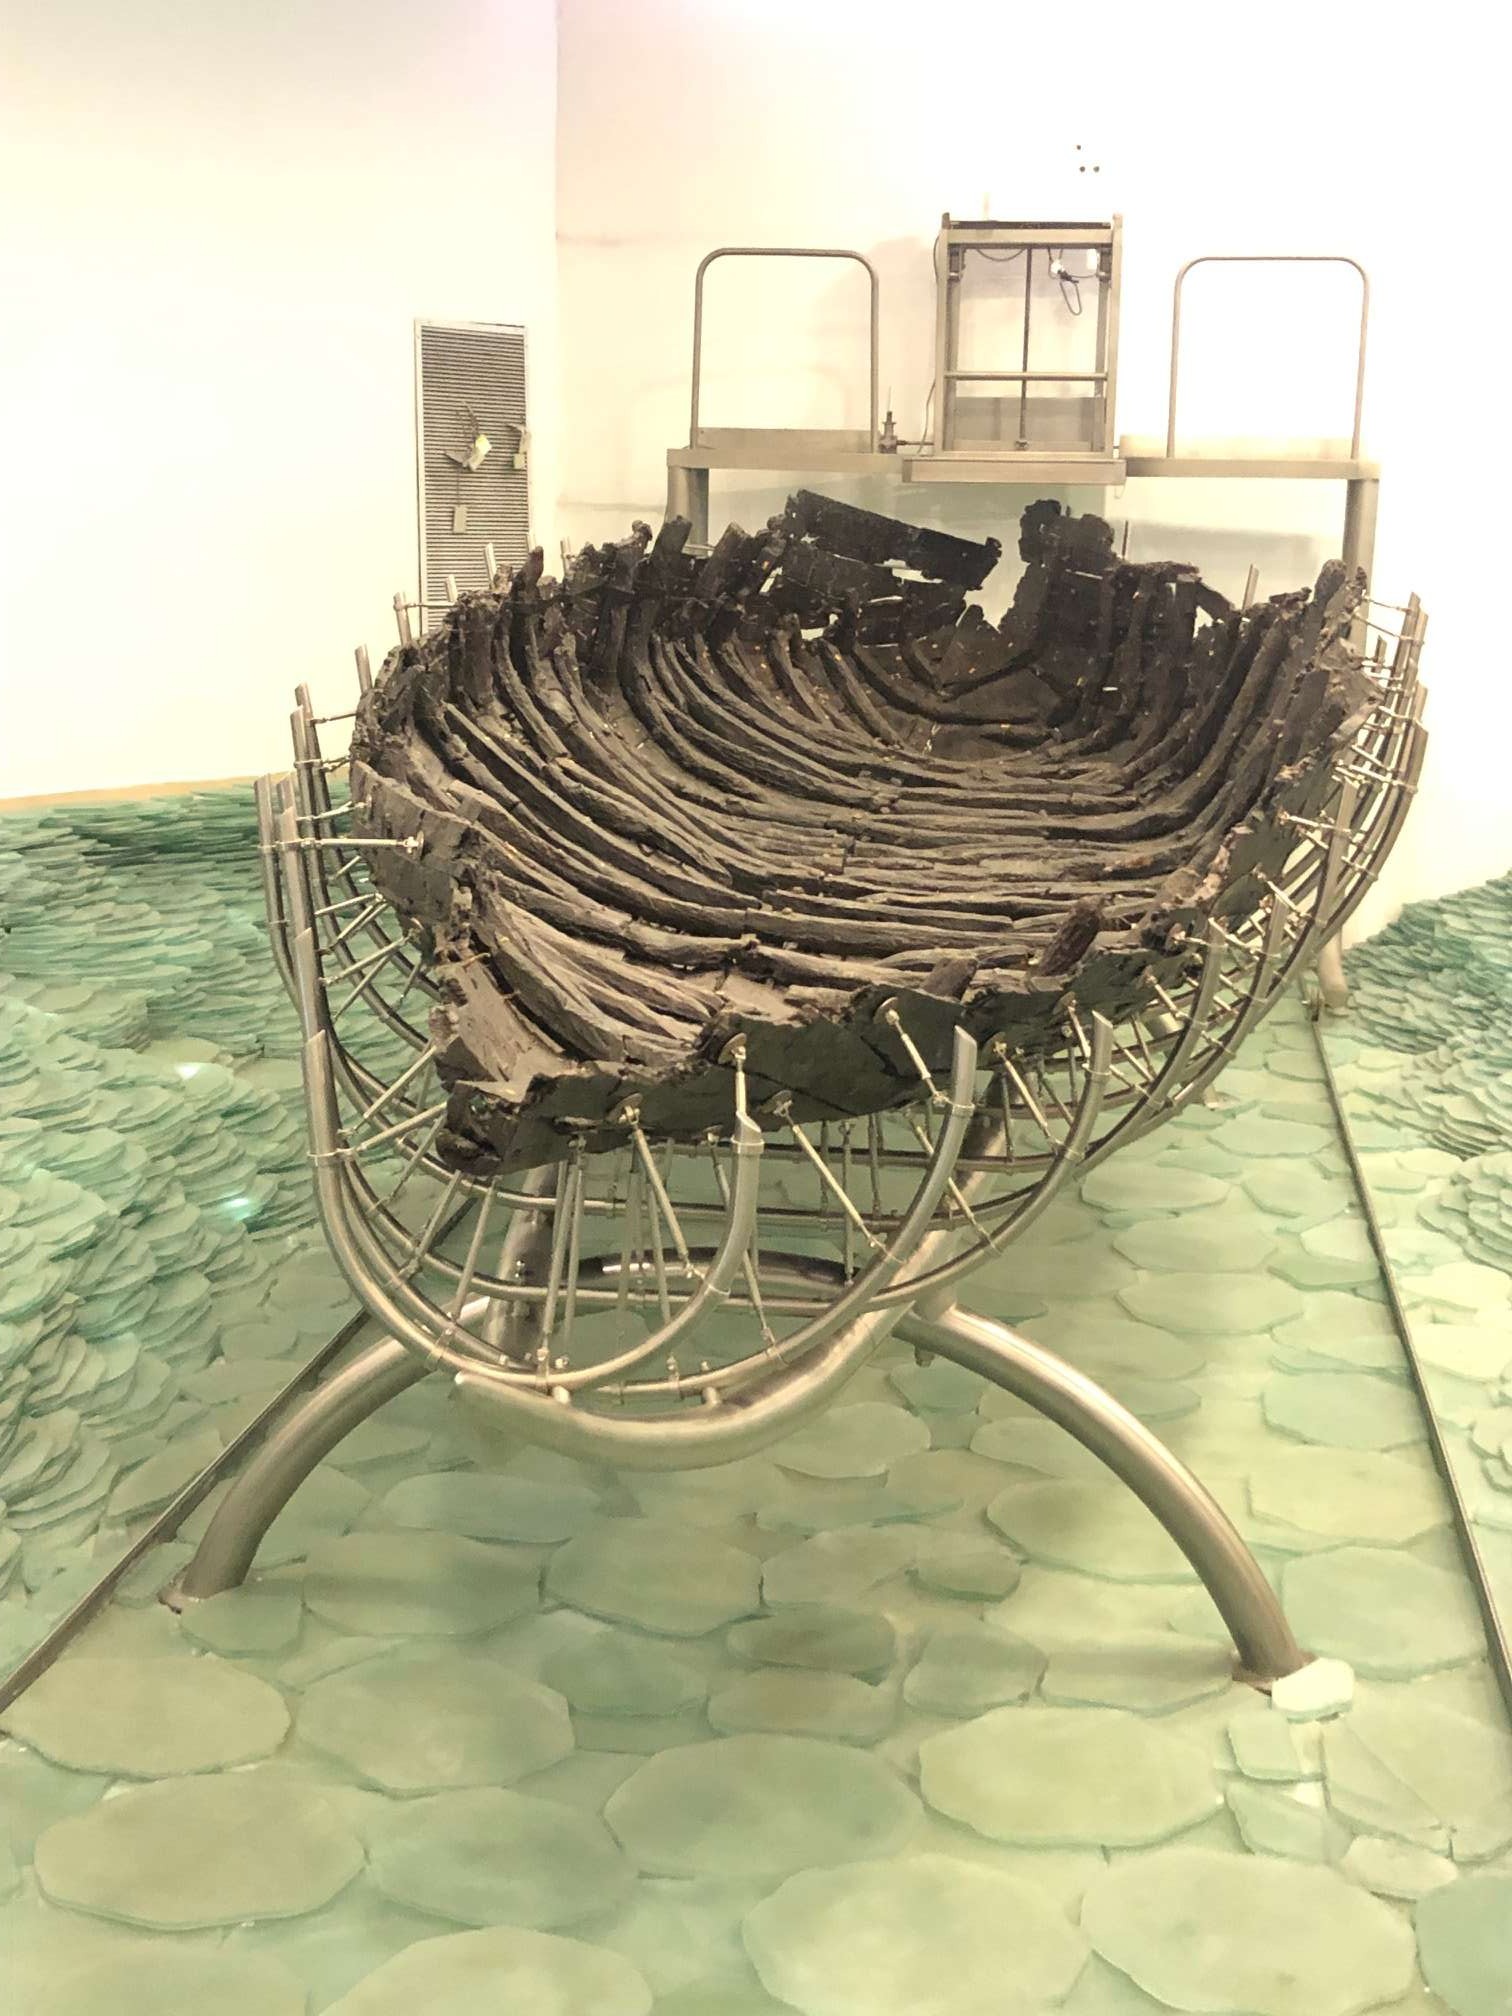 2,000 year old boat found in the sand of the sea of Galilee